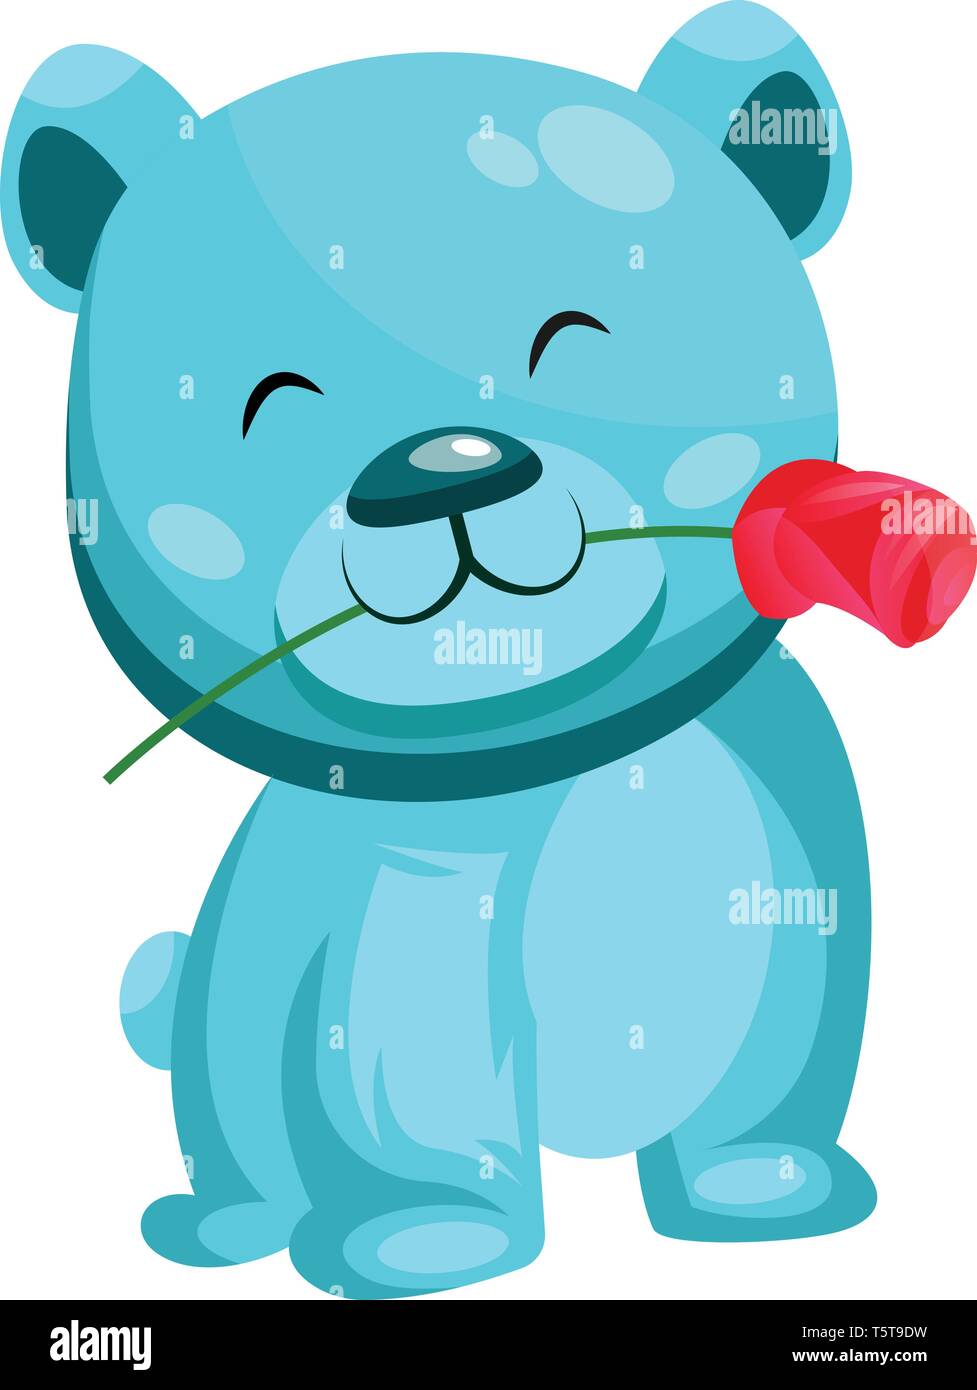 Turquoise bear holding a red rose in his mouth vector illustration on white background. Stock Vector